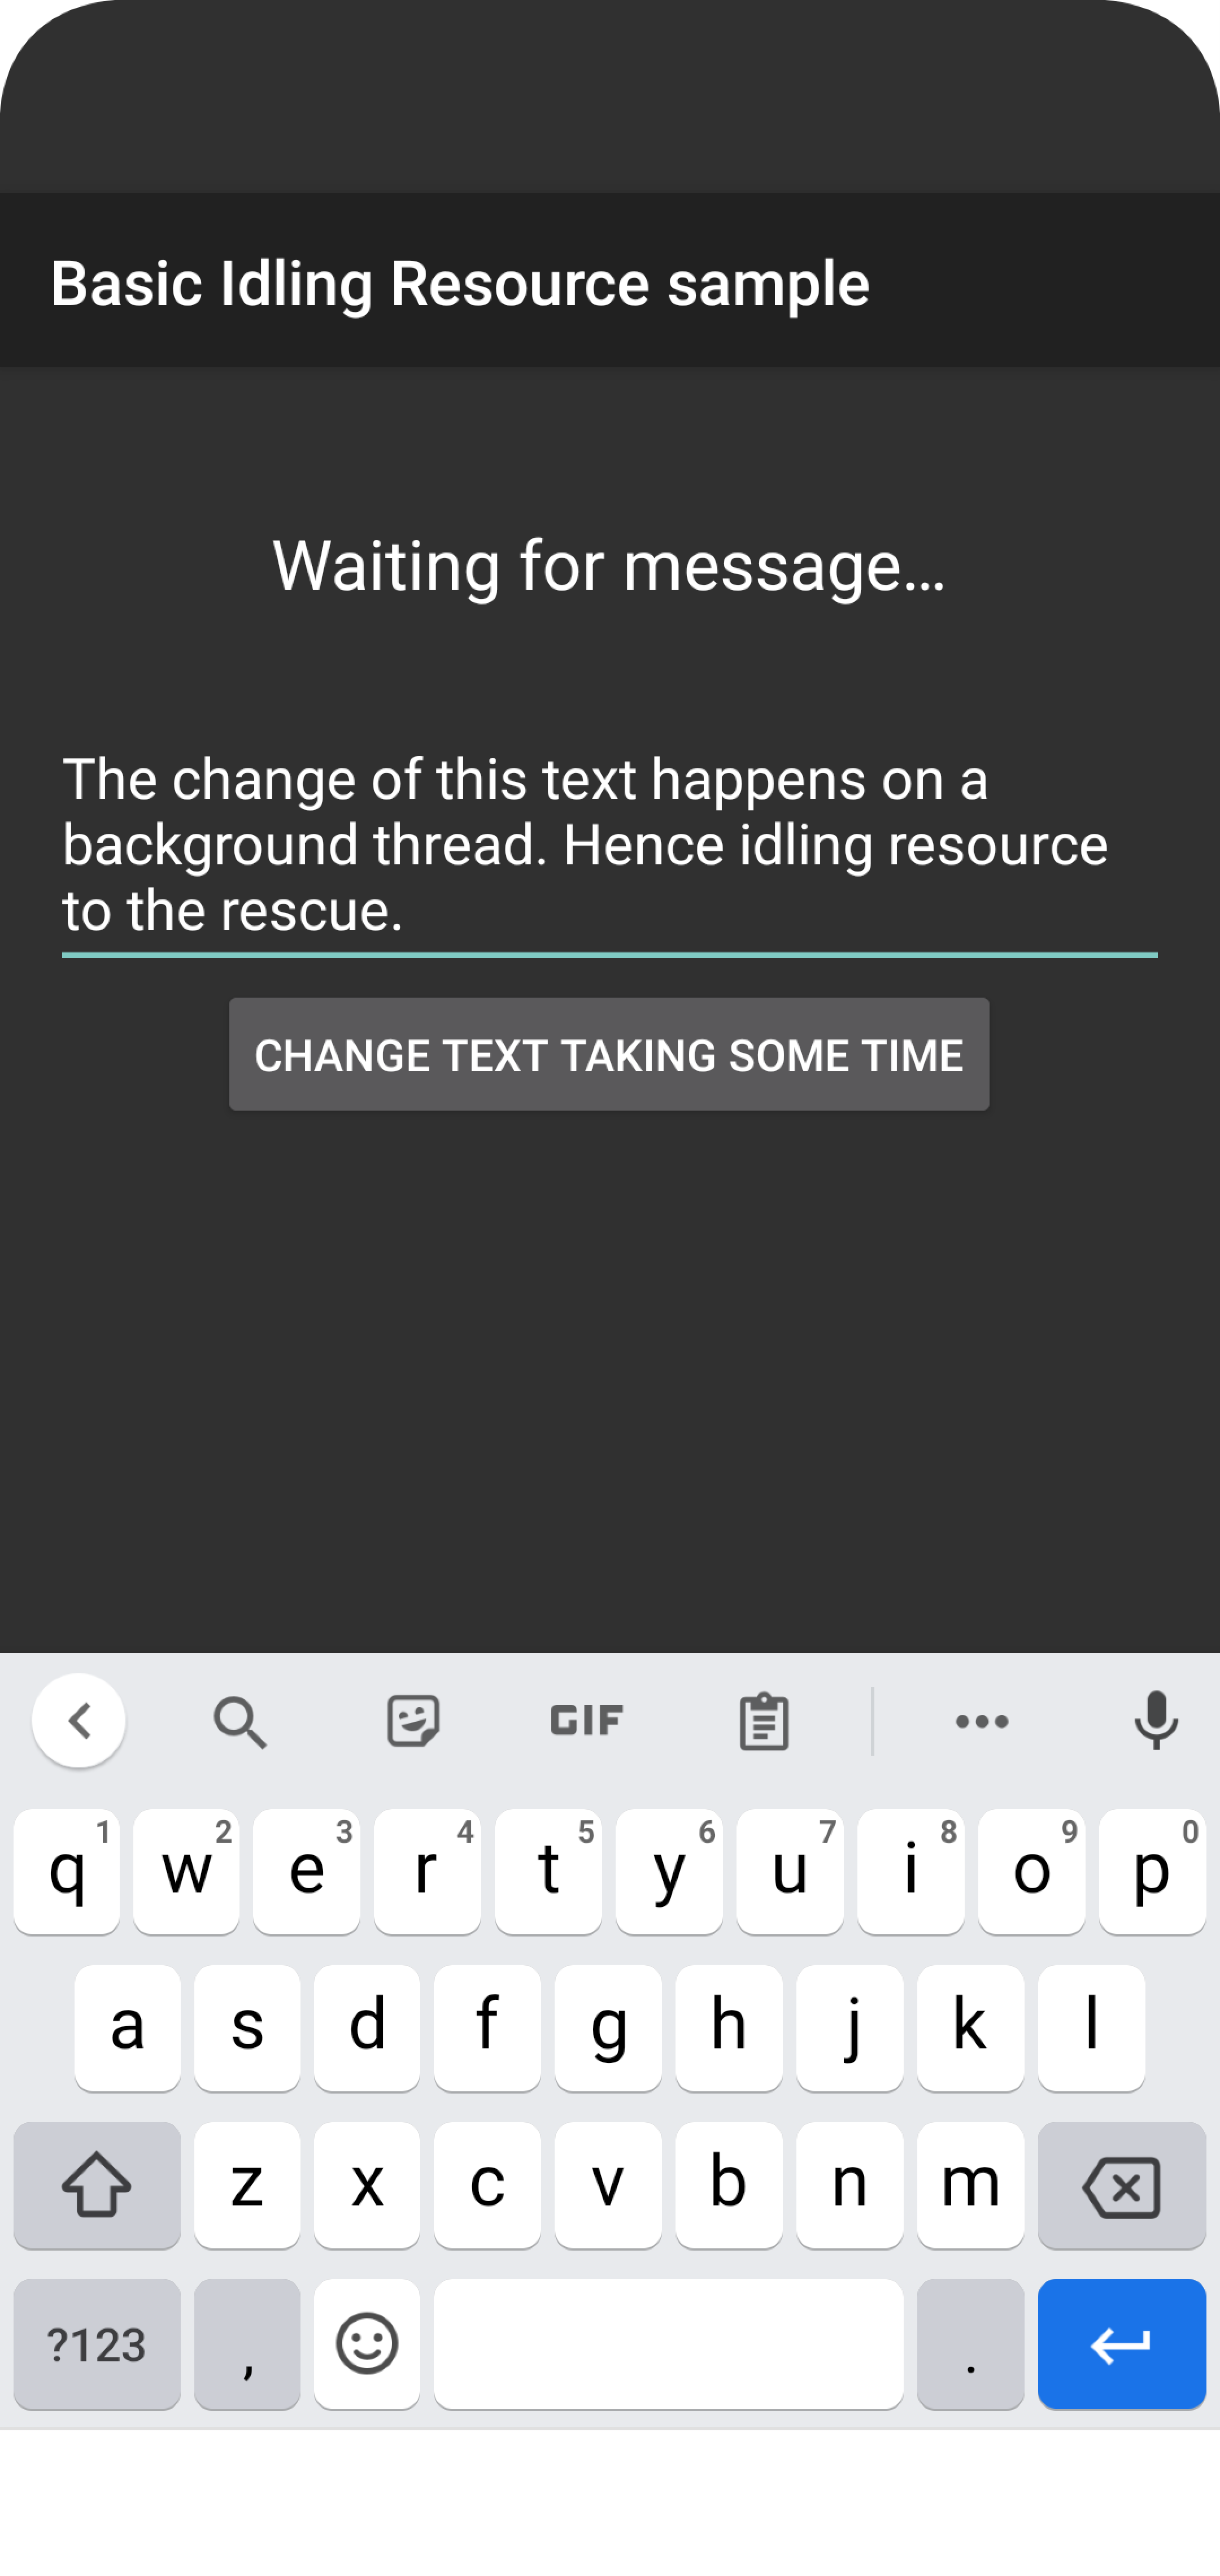 AND user taps on "Change text taking some time" Button (with id: changeTextBt)